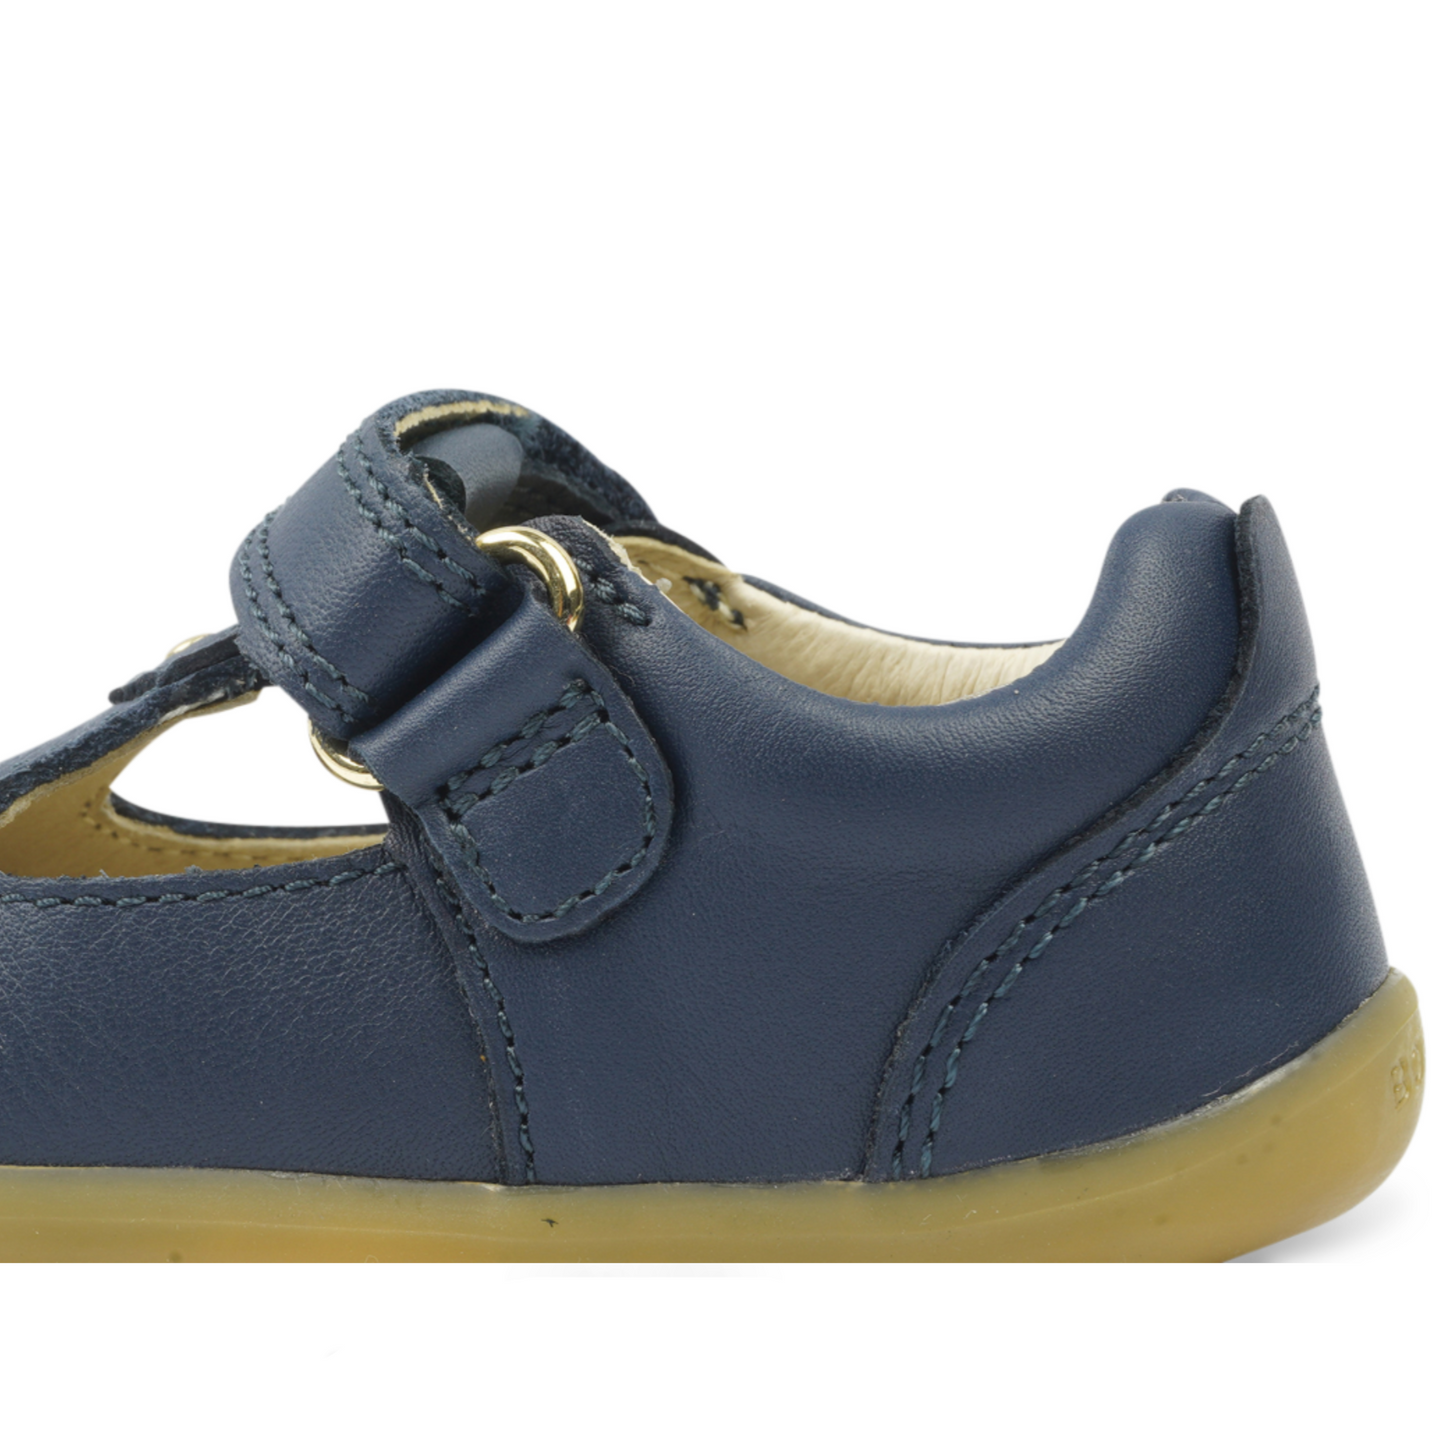 Bobux Louise Midnight Navy Leather Shoes